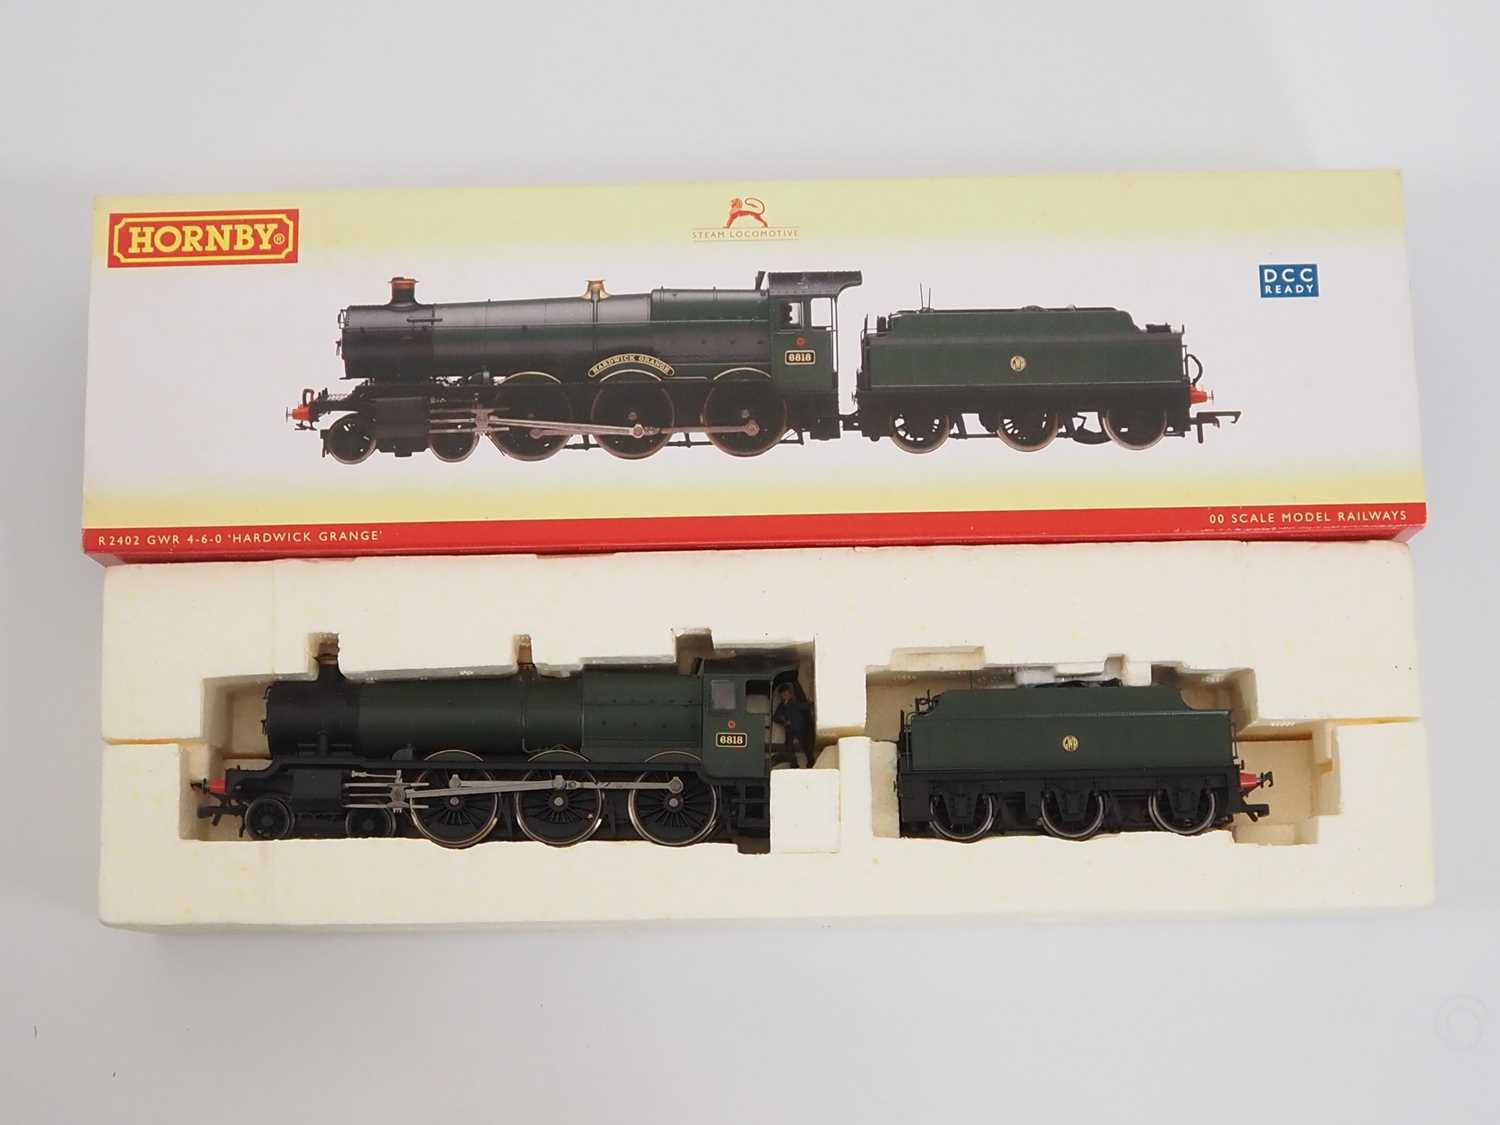 A pair of HORNBY (China) OO gauge steam locomotives in Great Western livery comprising 'Hardwick - Image 3 of 4